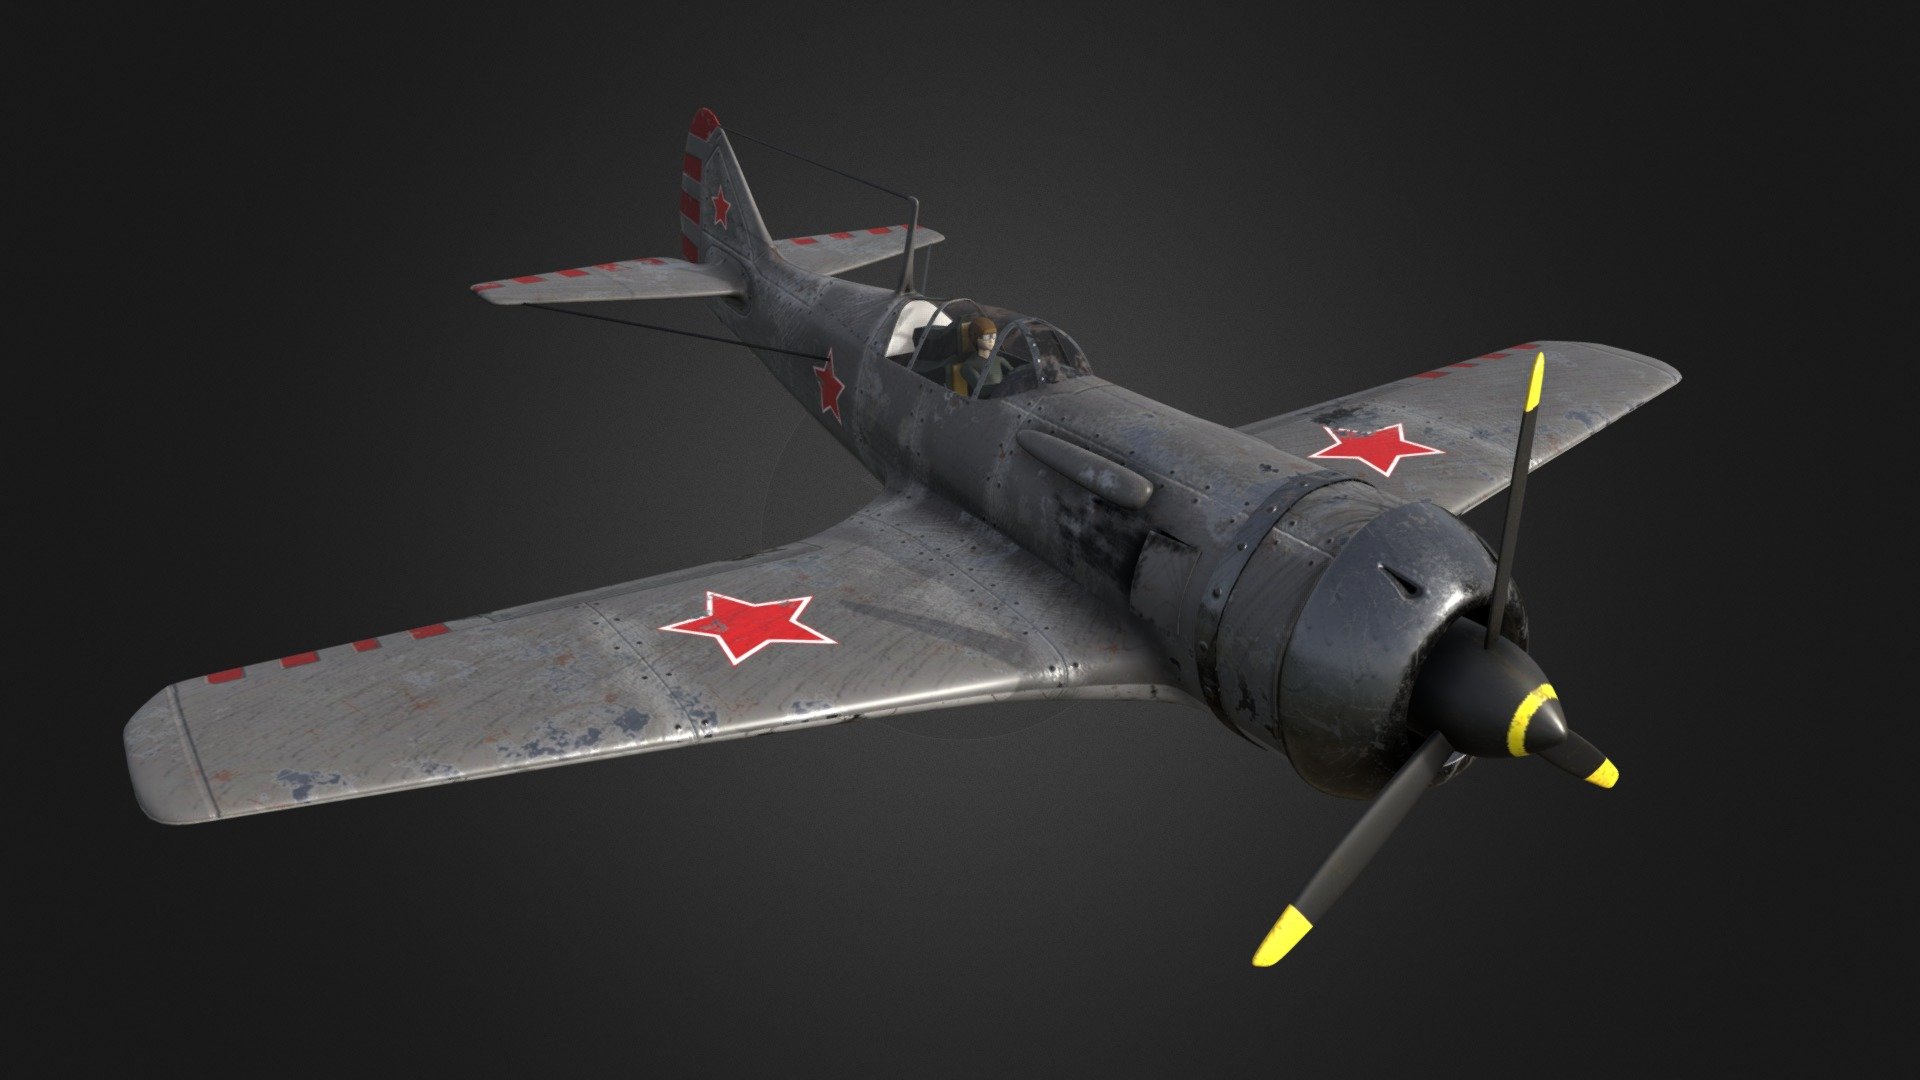 Update from my previous &ldquo;WWII Soviet Plane